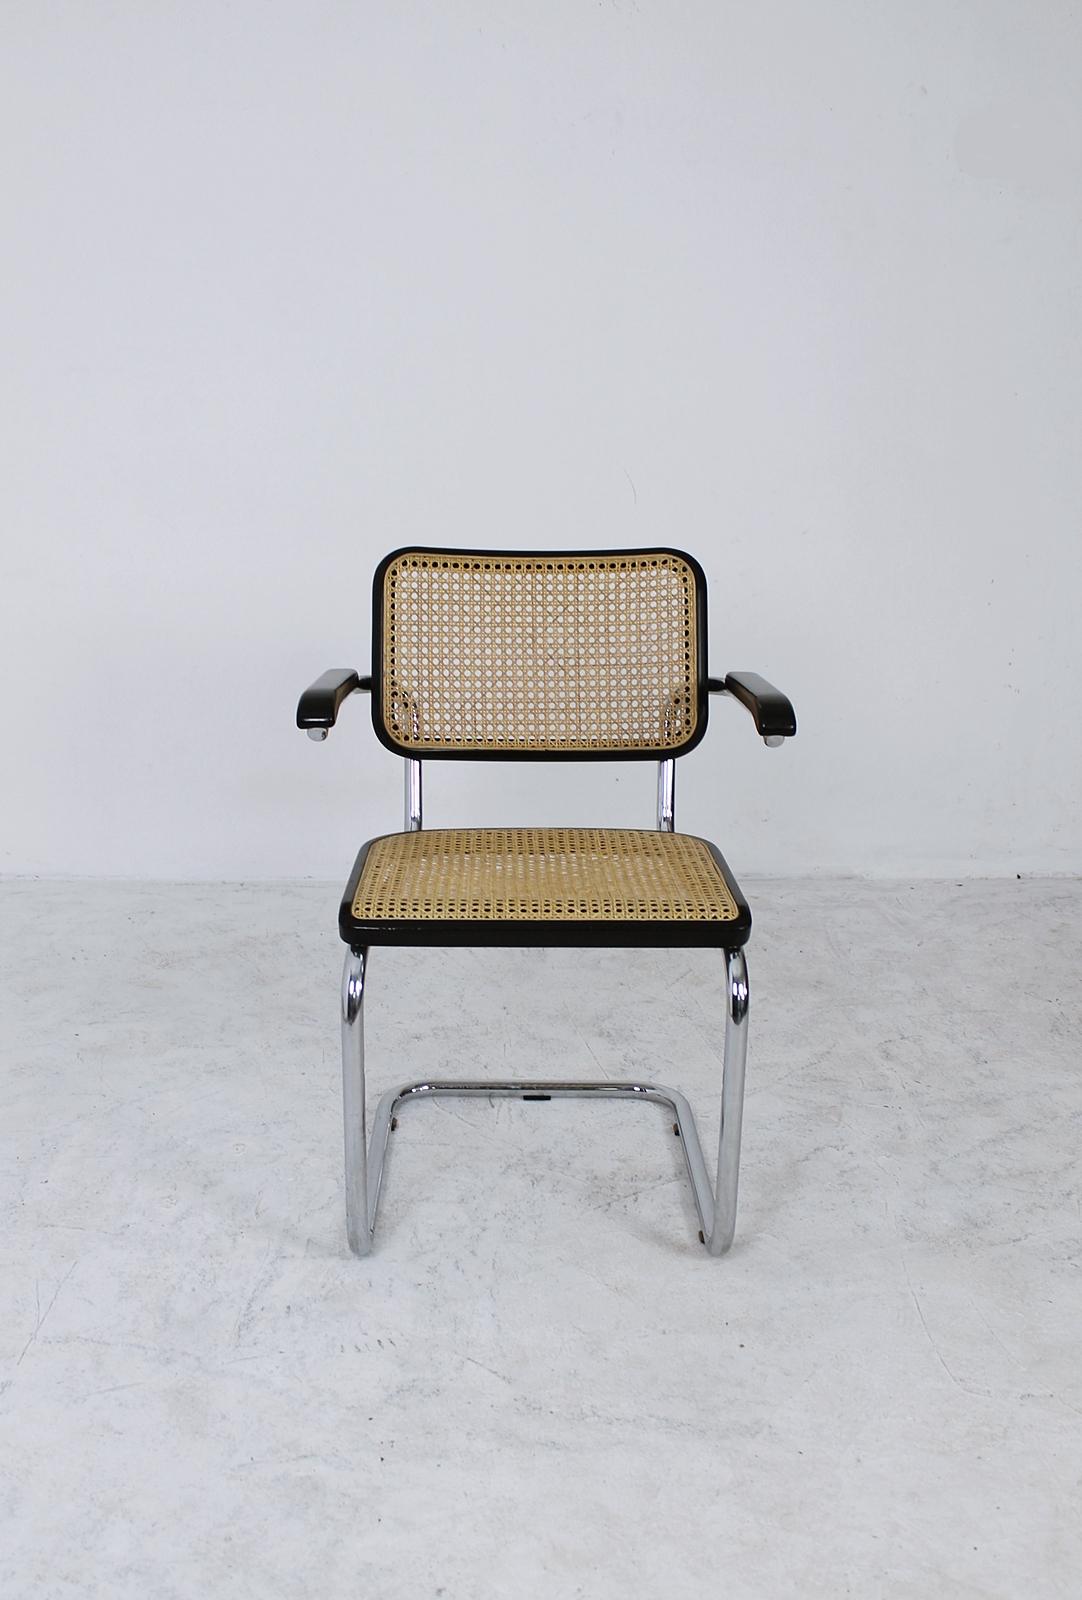 The B64 chair was designed by Marcel Breuer for Thonet in 1927.
These original Thonet chair are made of chrome-plated tubular steel, dark stained beech, bentwood and cane.
The first producer of the B64 was Thonet, starting in 1927.
Later in the